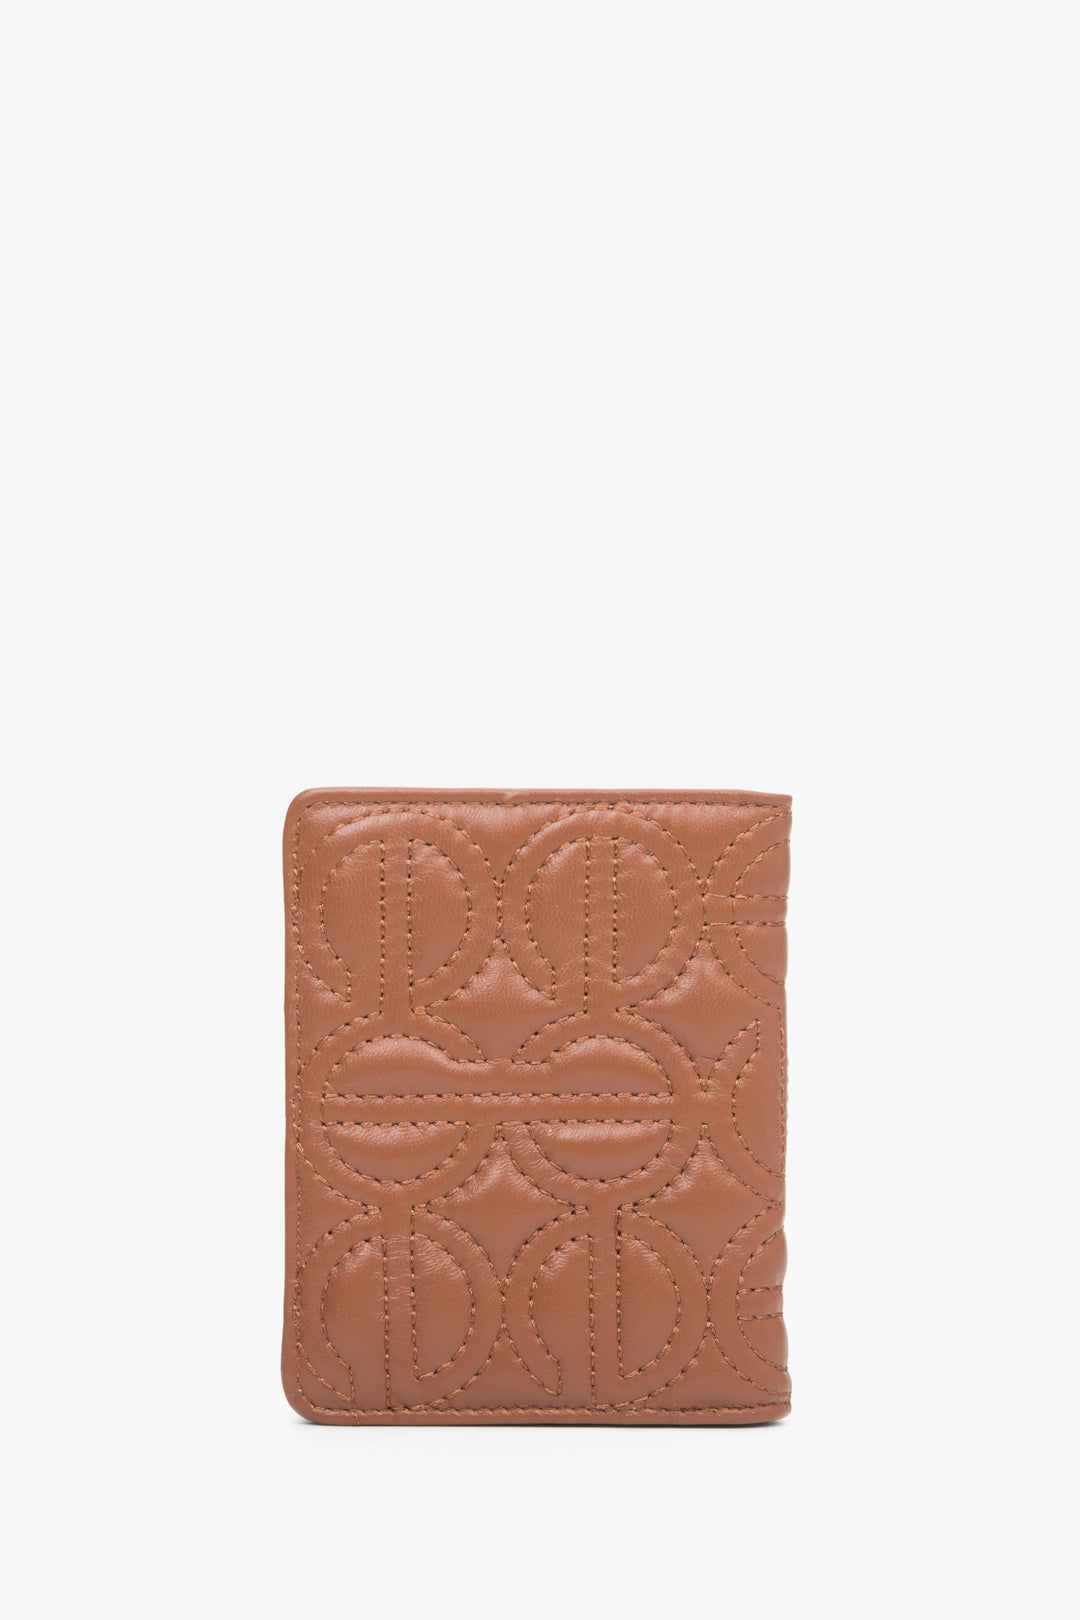 Small women's brown card leather wallet by Estro with embossed logo.